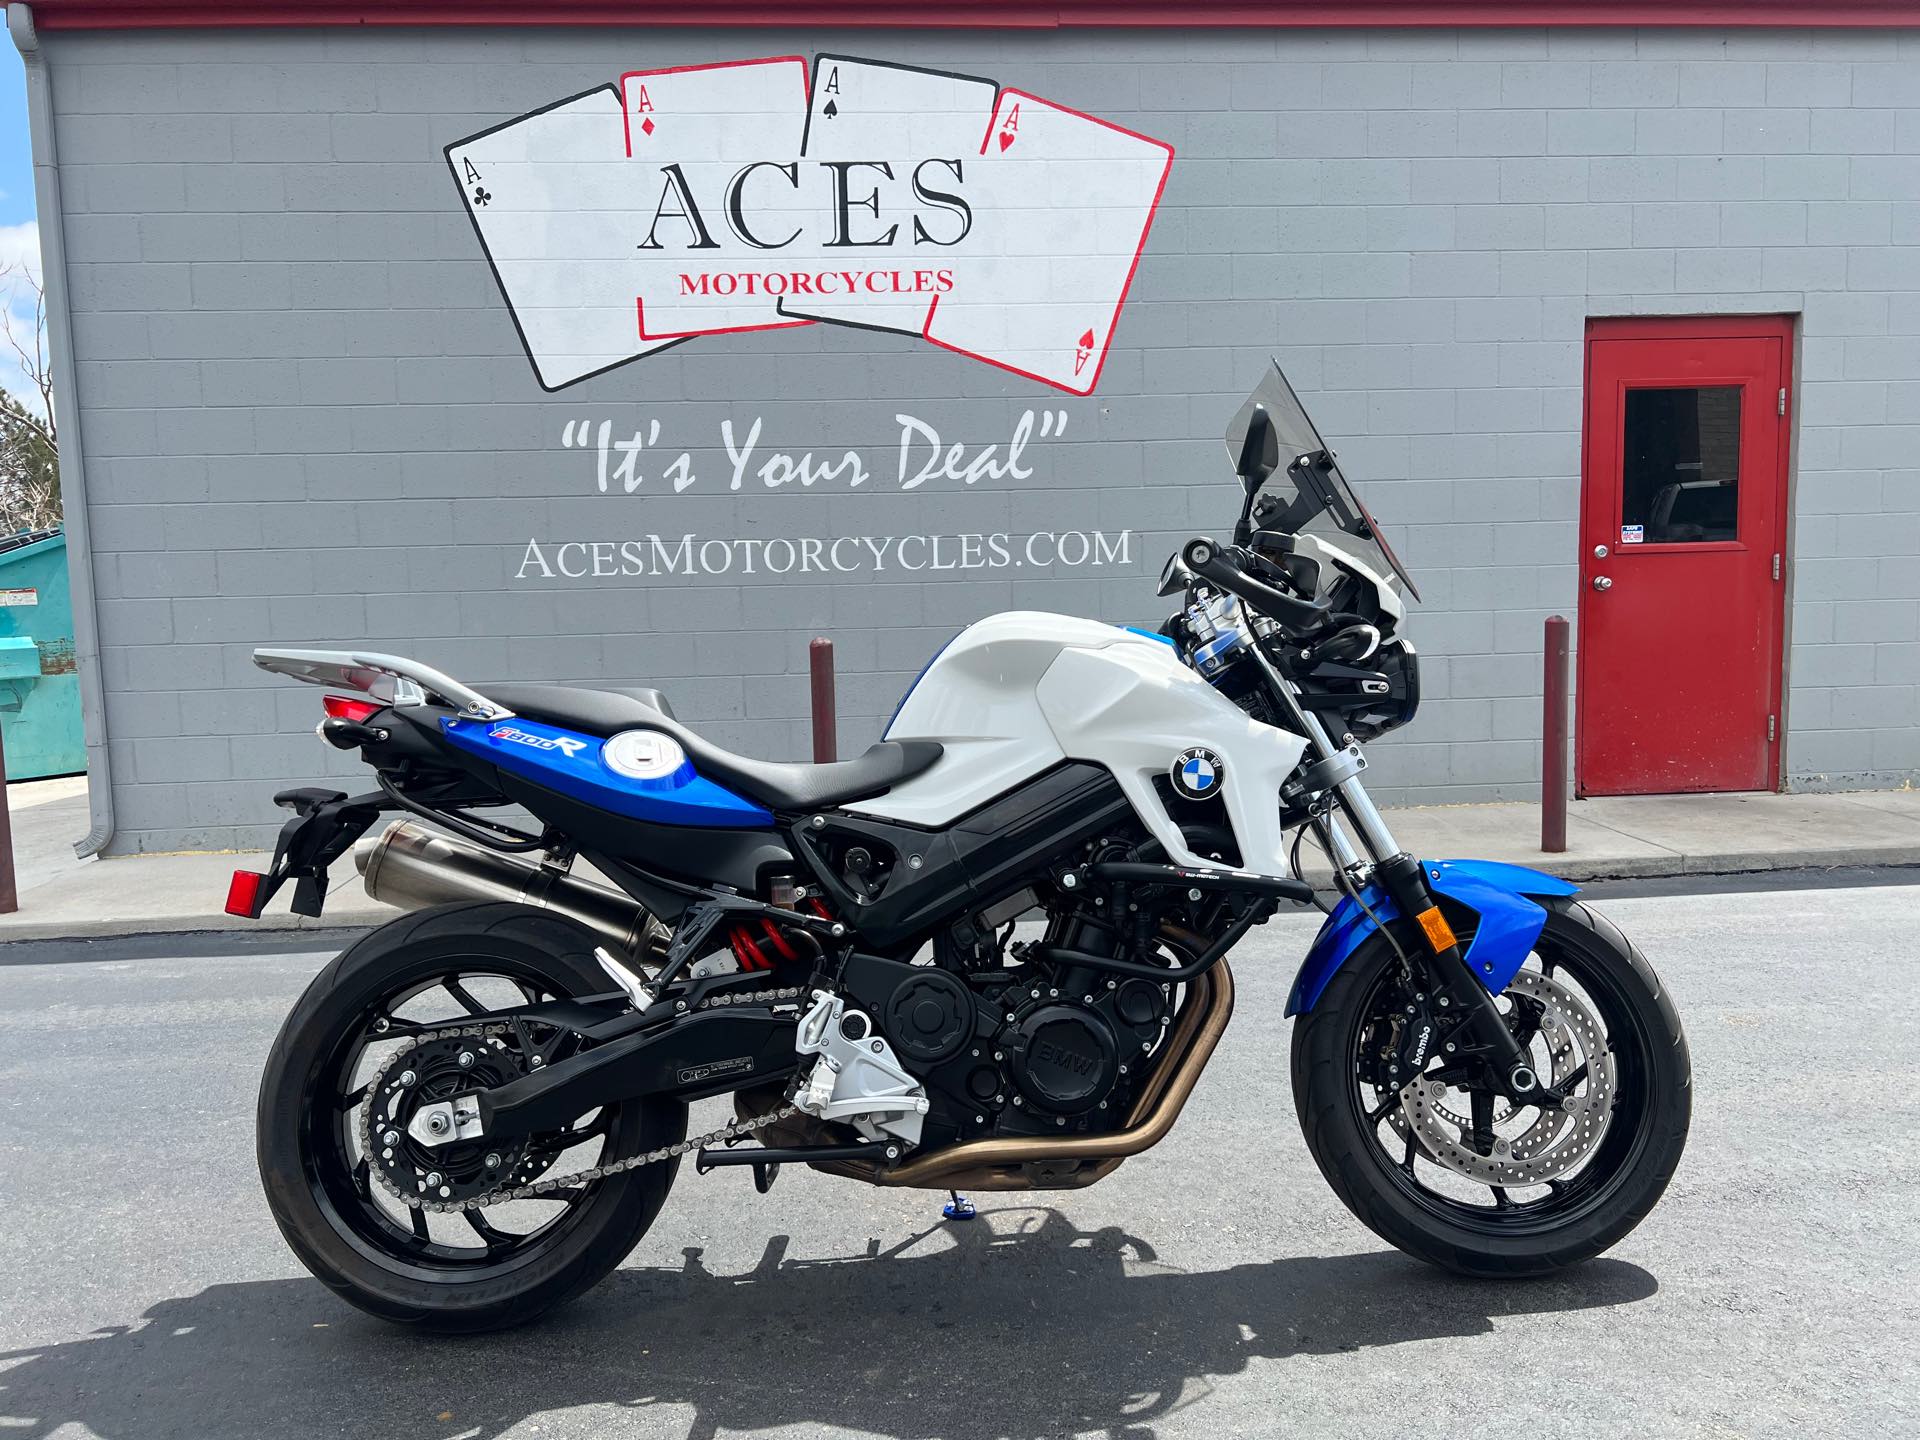 2012 BMW F 800 R at Aces Motorcycles - Fort Collins